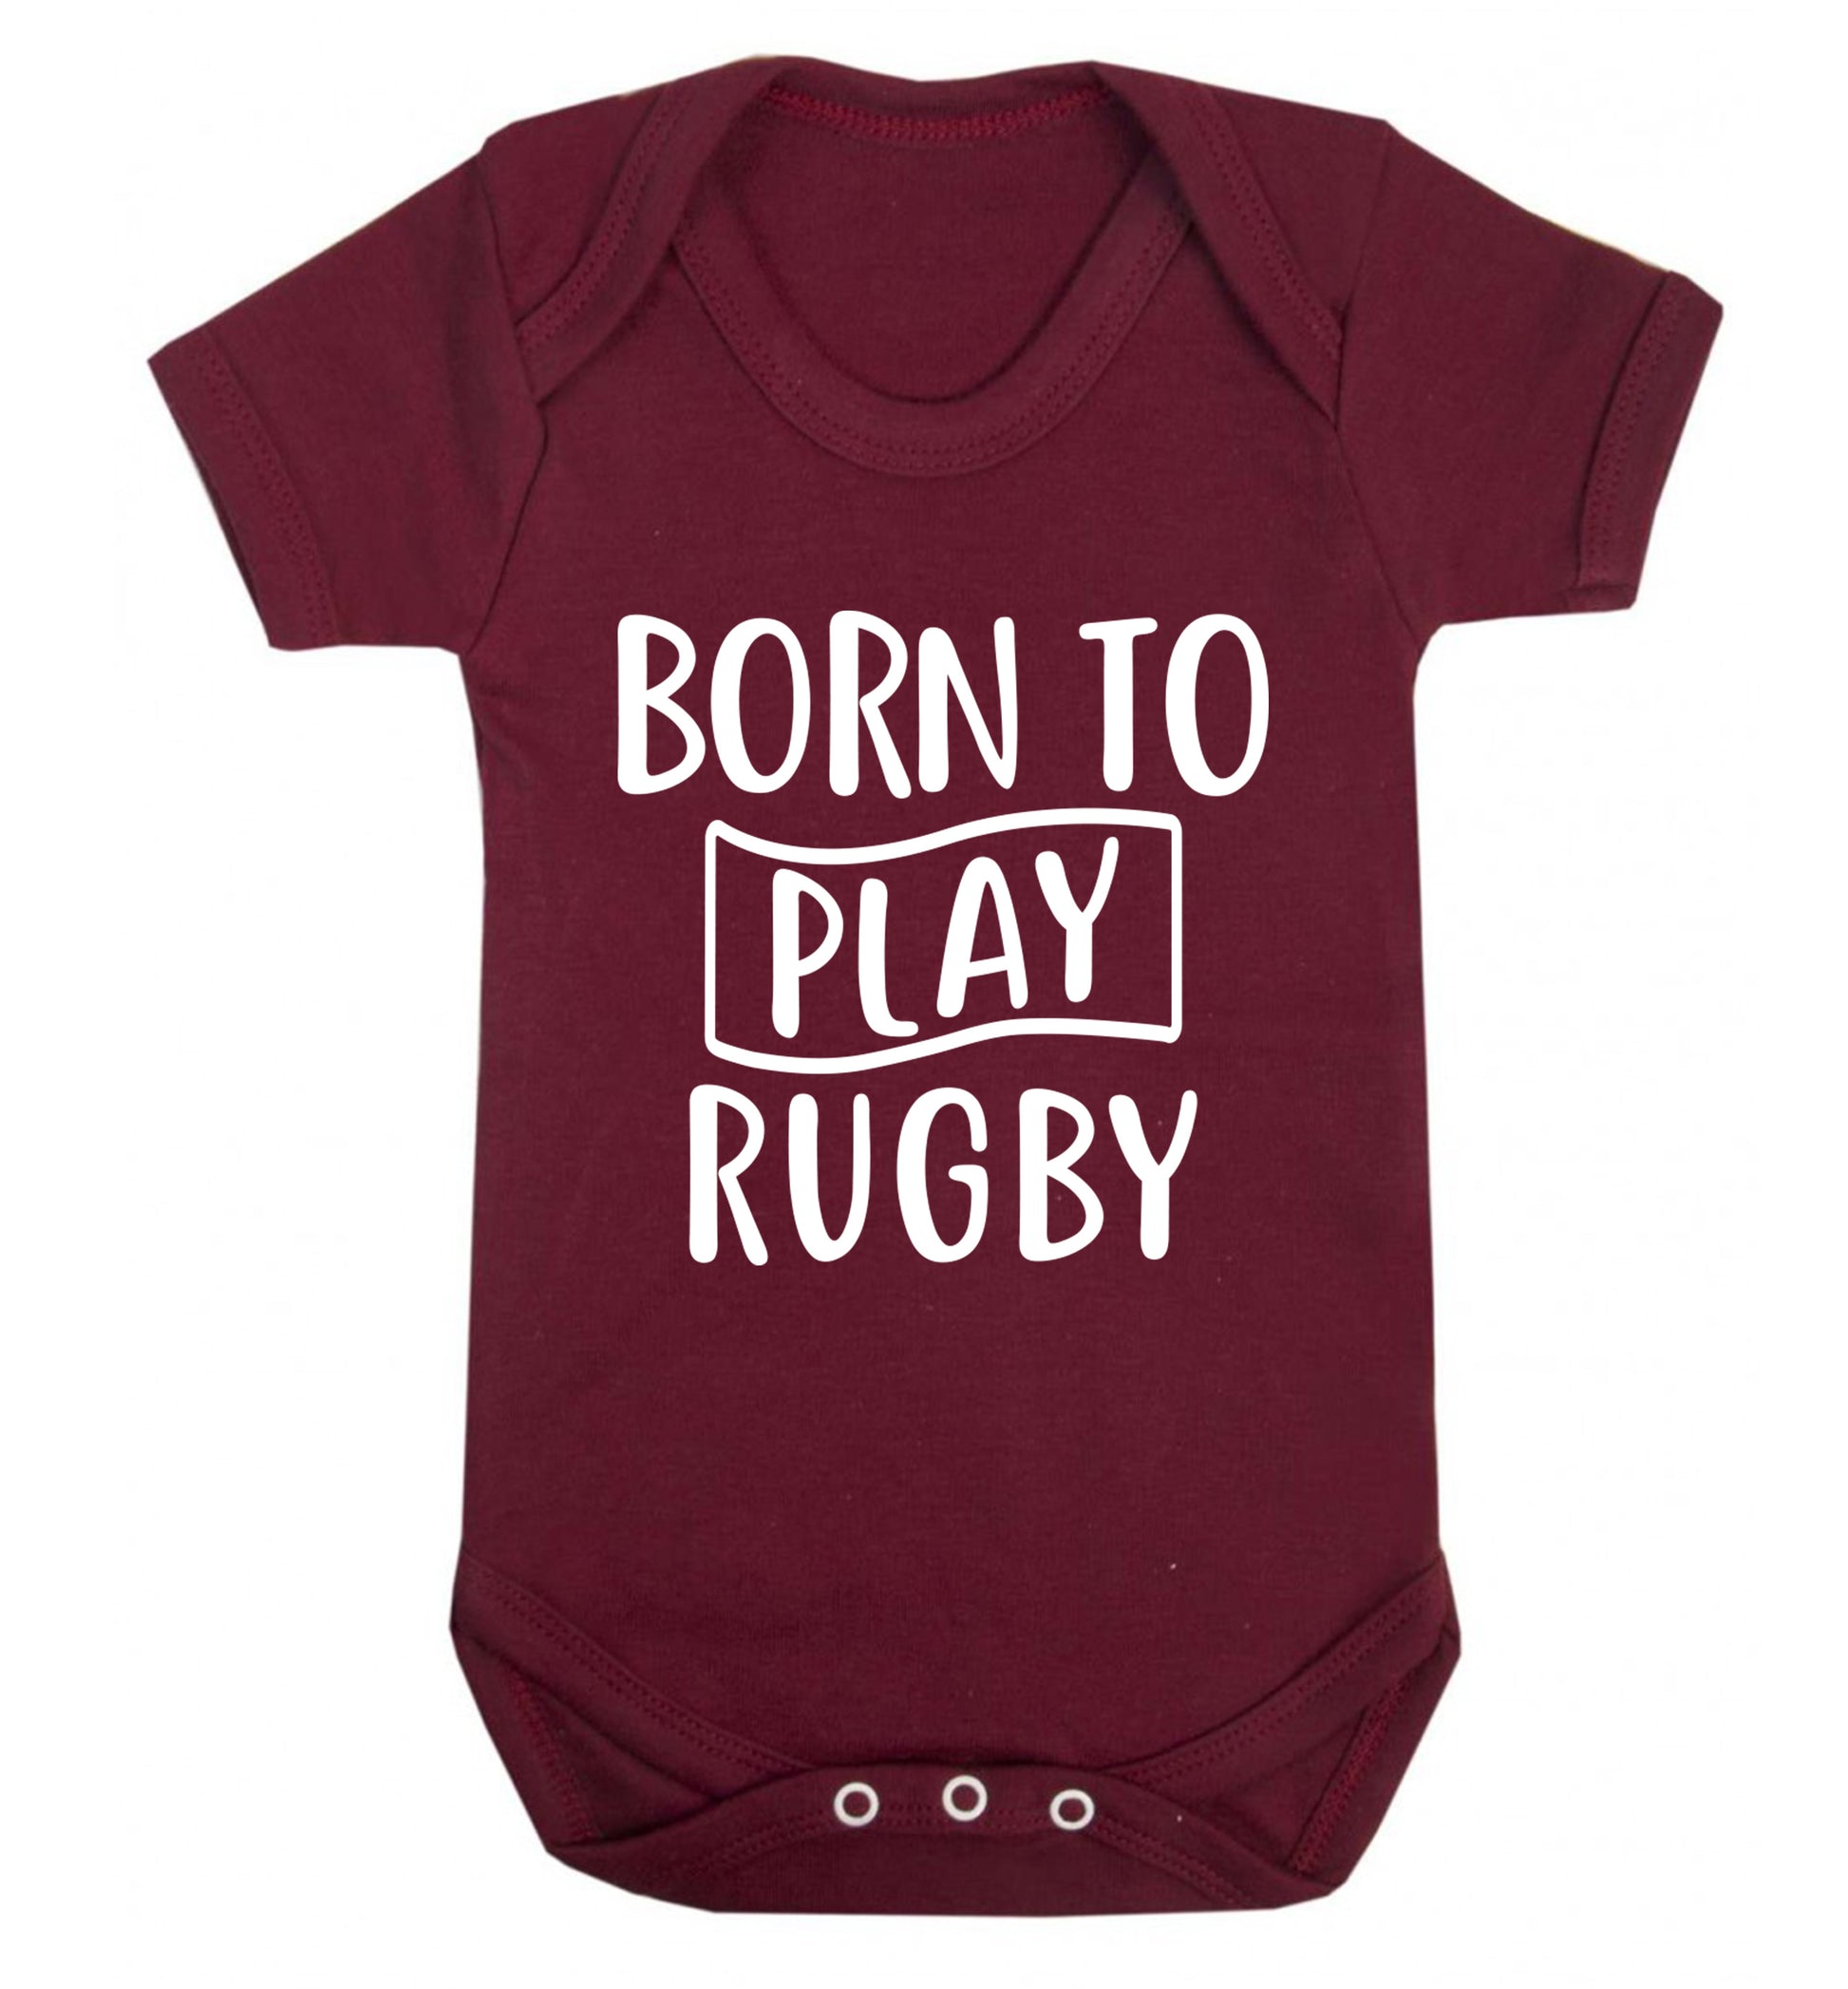 Born to play rugby Baby Vest maroon 18-24 months